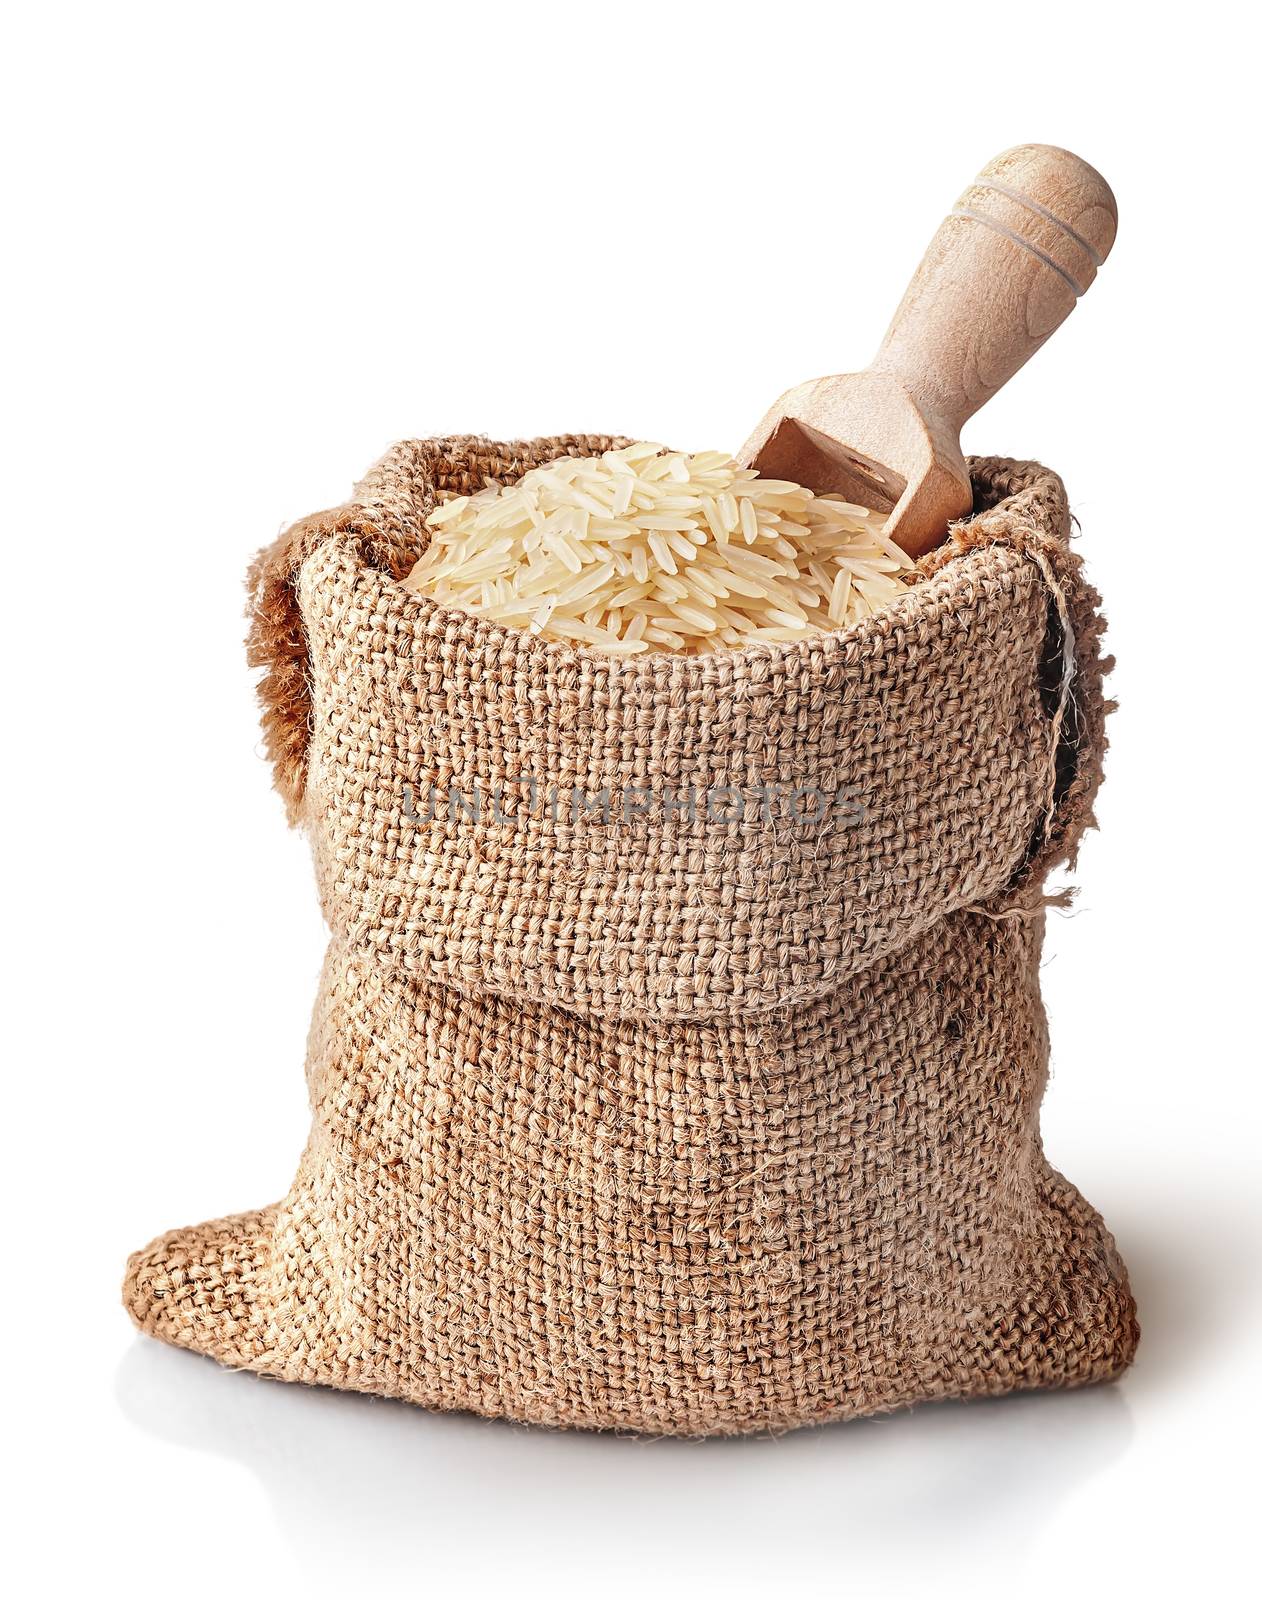 White rice and scoop in sack by Cipariss